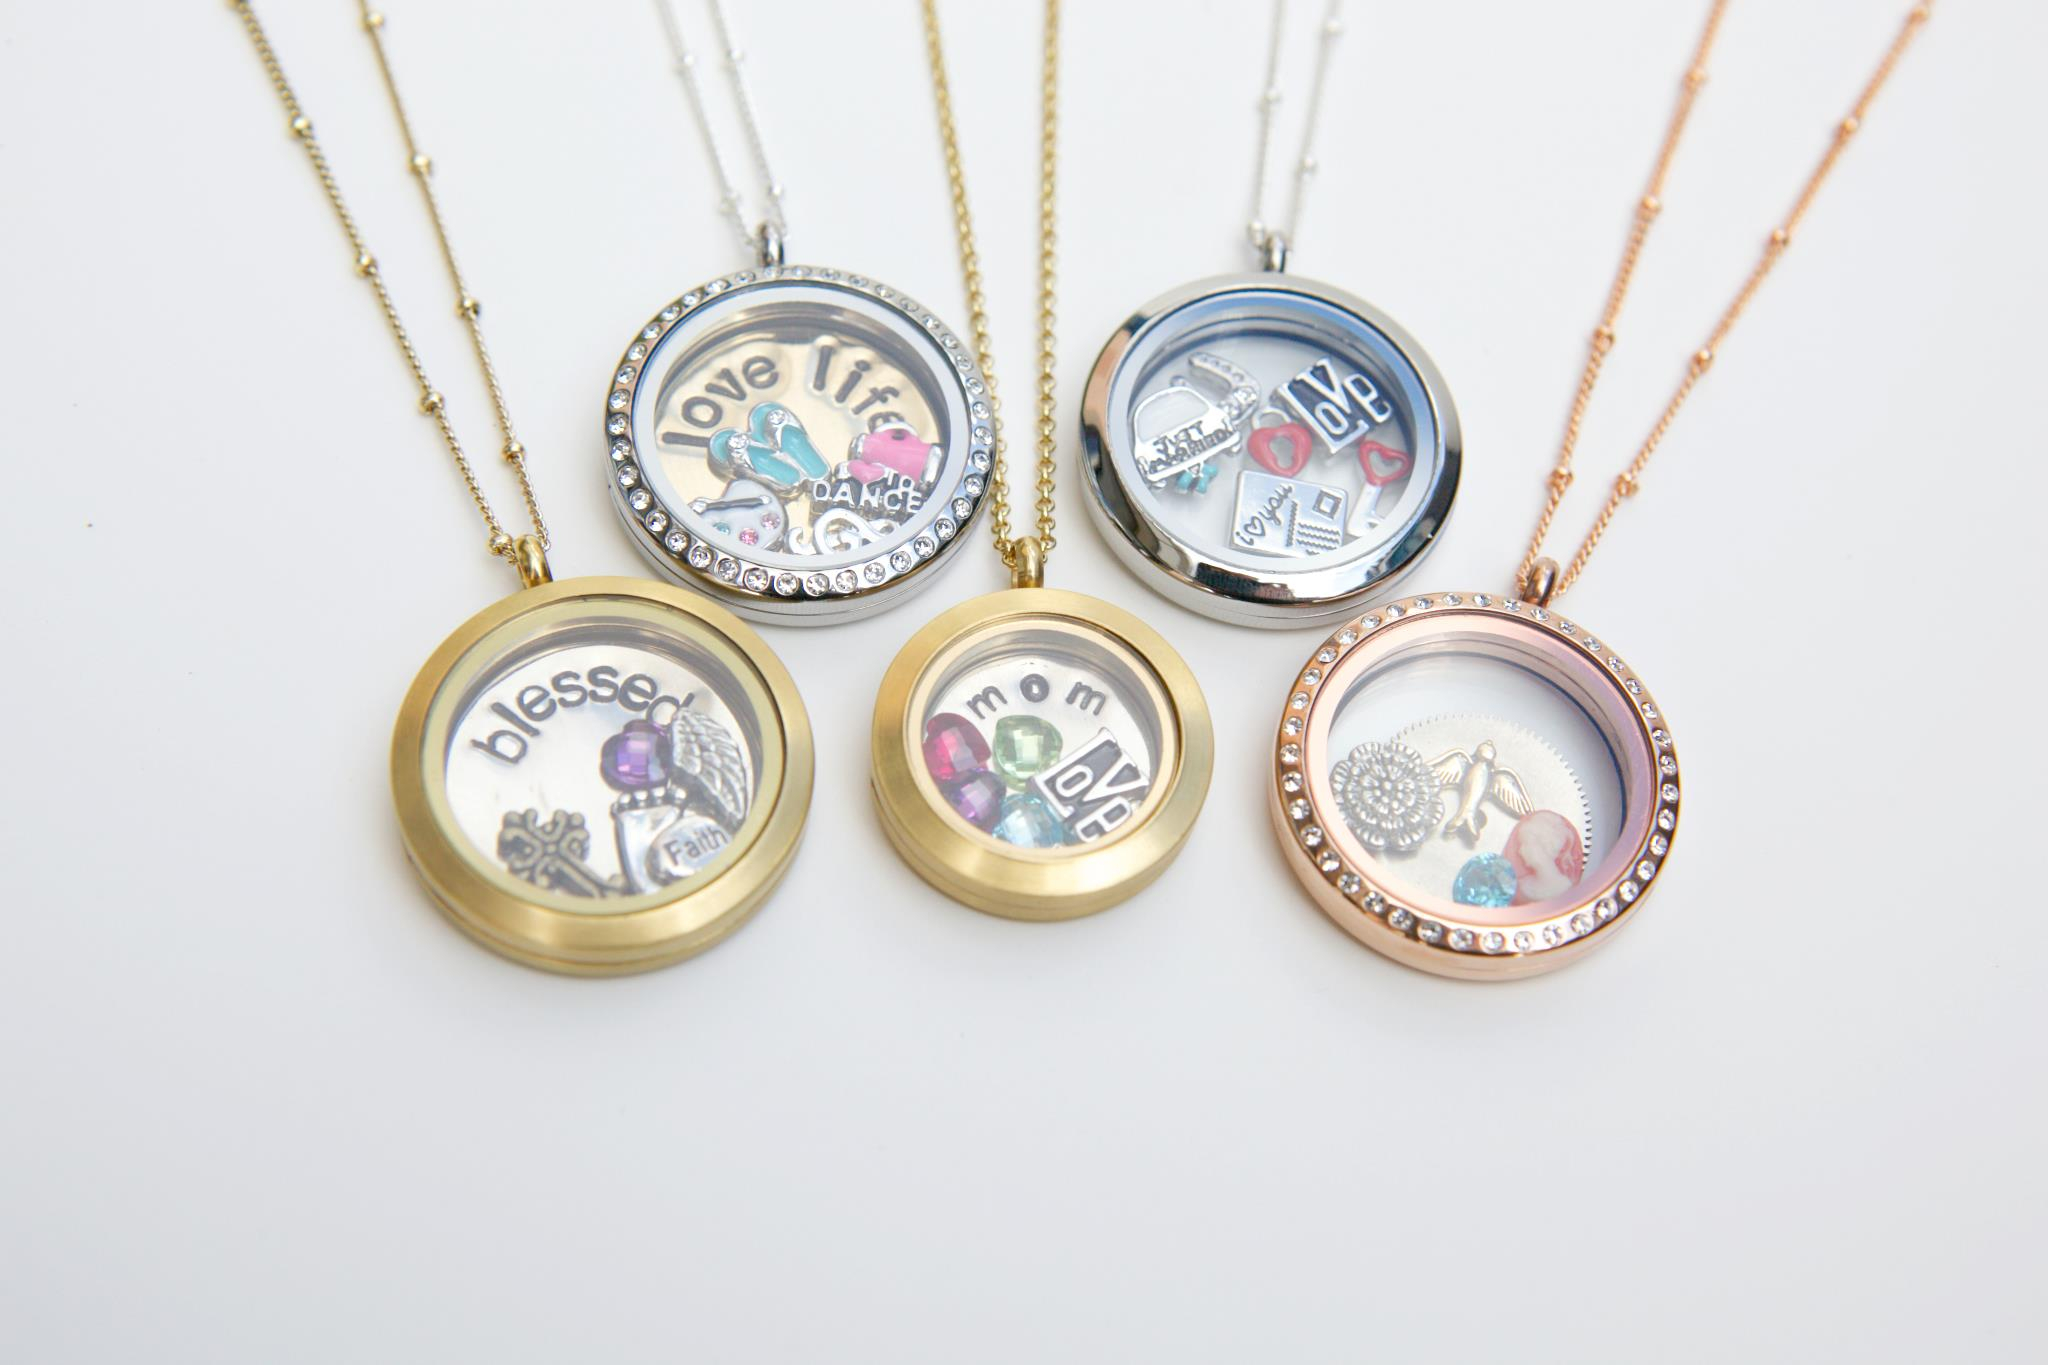 Cheap Origami Owl Charms Buy Origami Owl Jewelry Online Charms Necklace Products